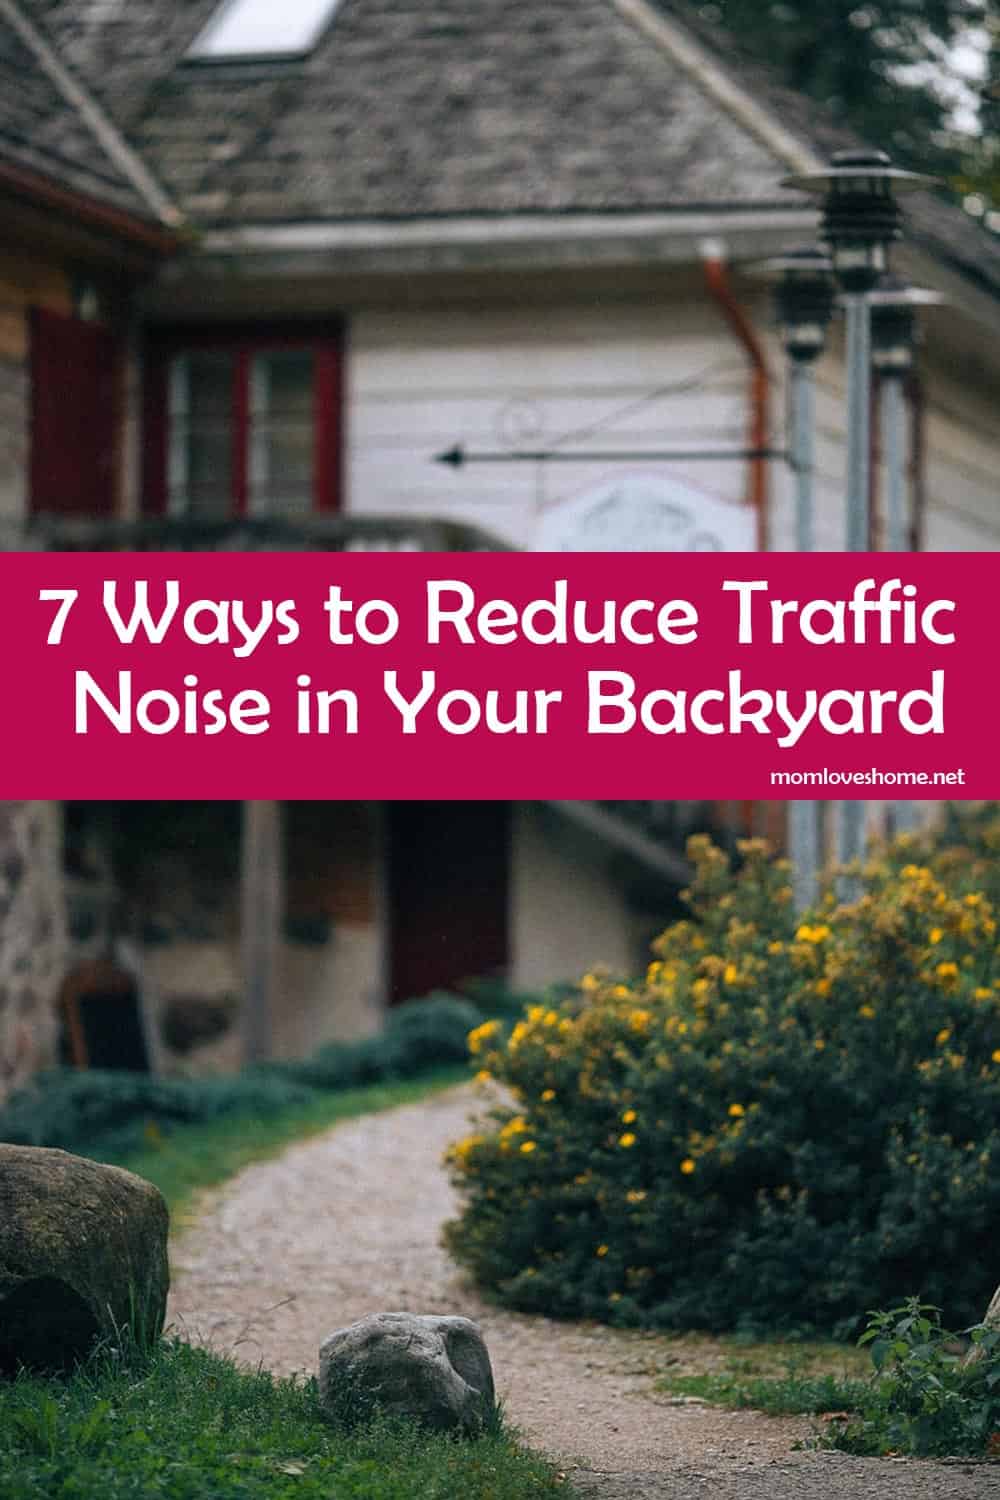 7 Ways to Reduce Traffic Noise in Your Backyard